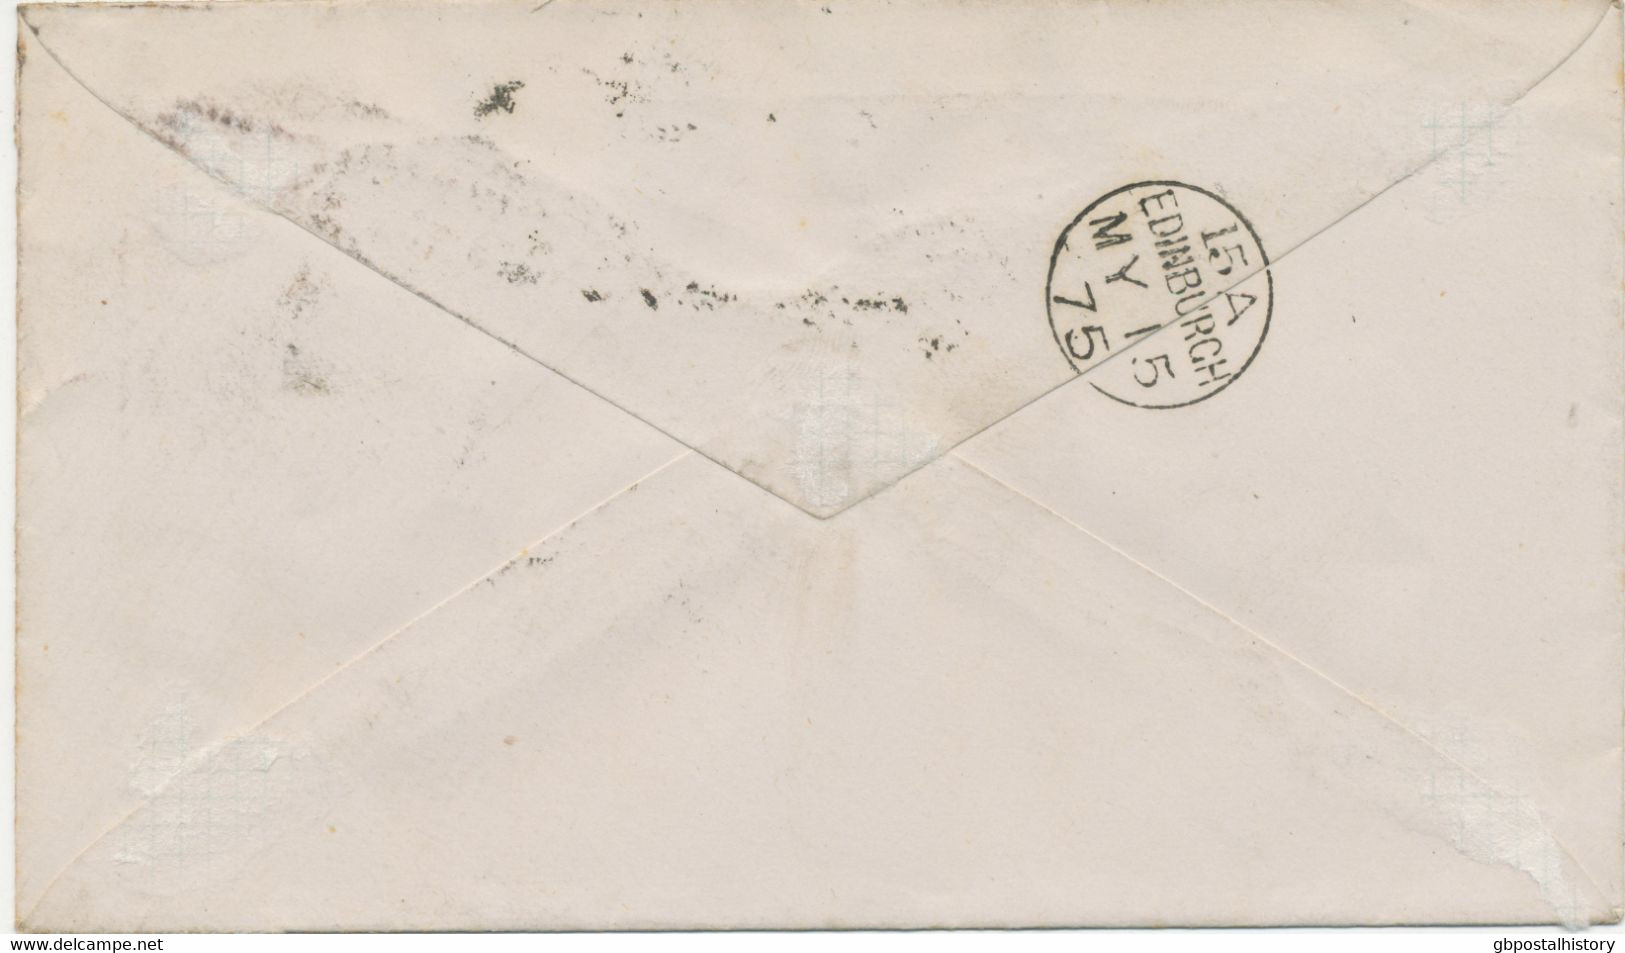 GB „159 / GLASGOW“ Scottish Duplex (4 Bars With Same Length, Time Code „2 &“, Datepart 20mm) On Very Fine Cover - Brieven En Documenten